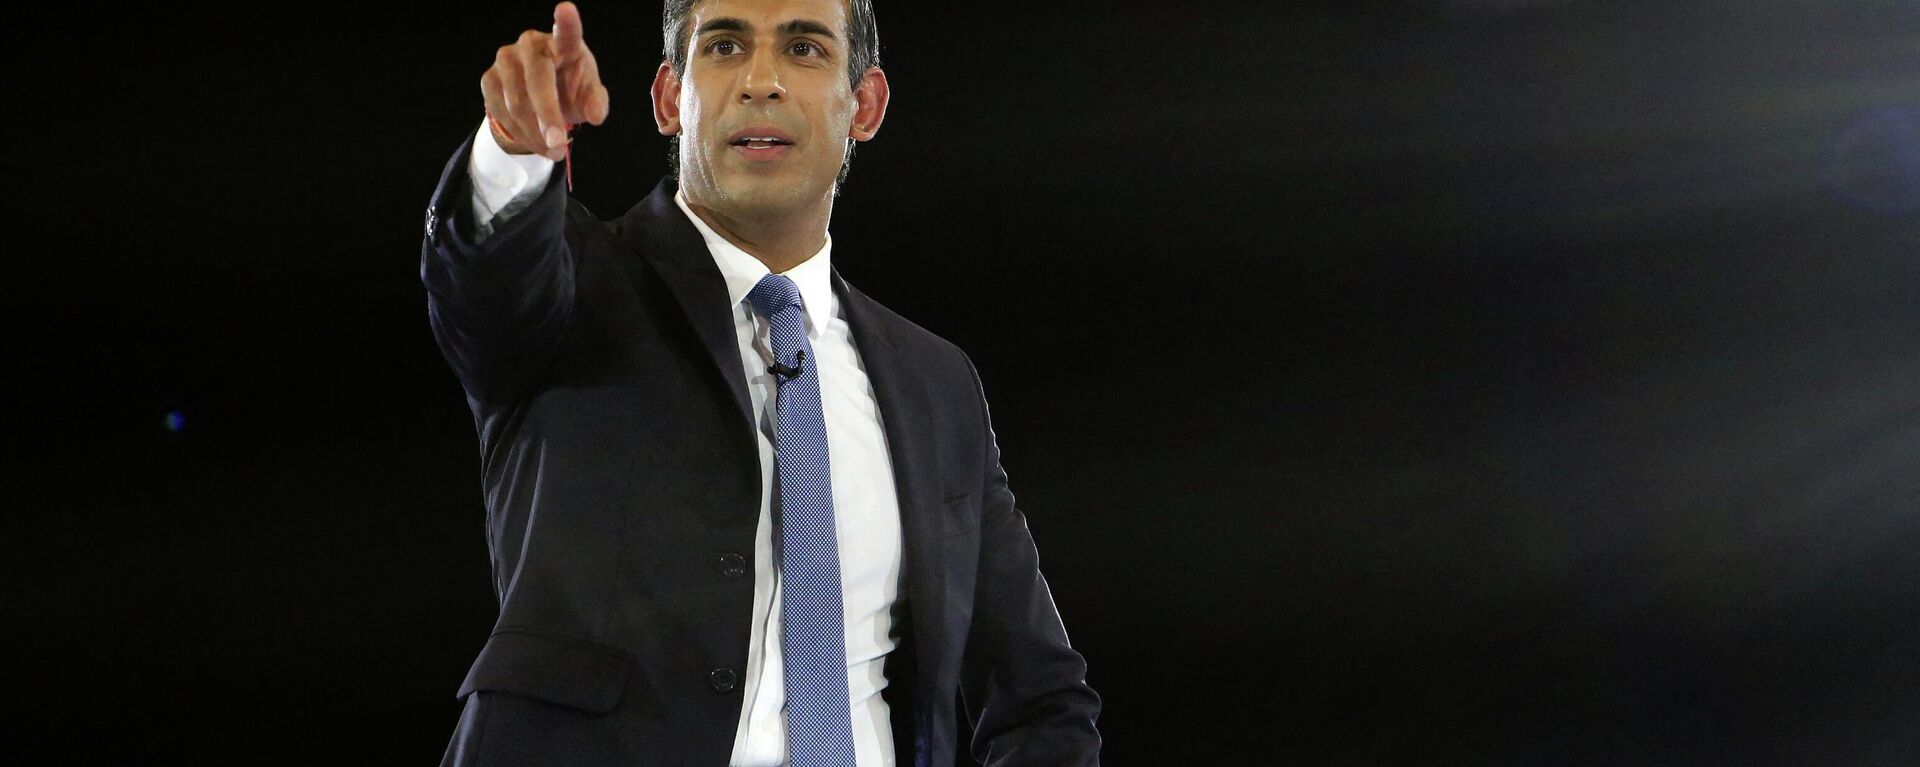 Rishi Sunak, Britain's former Chancellor of the Exchequer and a contender to become the country's next Prime Minister and leader of the Conservative party, answers questions as he takes part in the final Conservative Party Hustings event at Wembley Arena, in London, on August 31, 2022 - Sputnik International, 1920, 24.10.2022